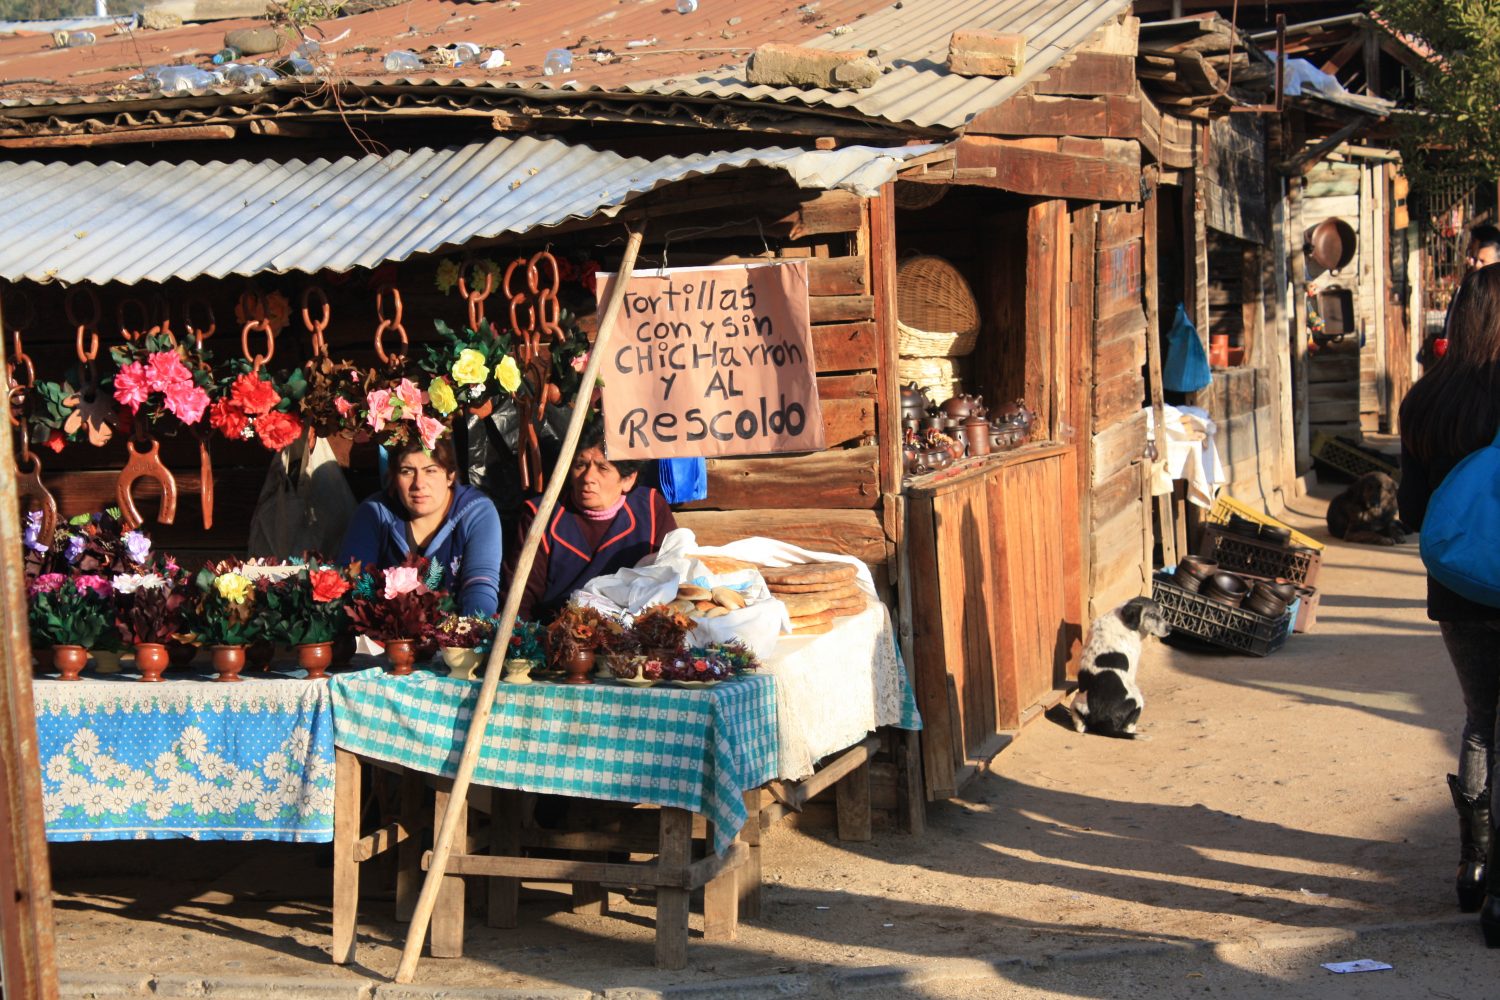 Pomaire's street selling handicraft and pottery